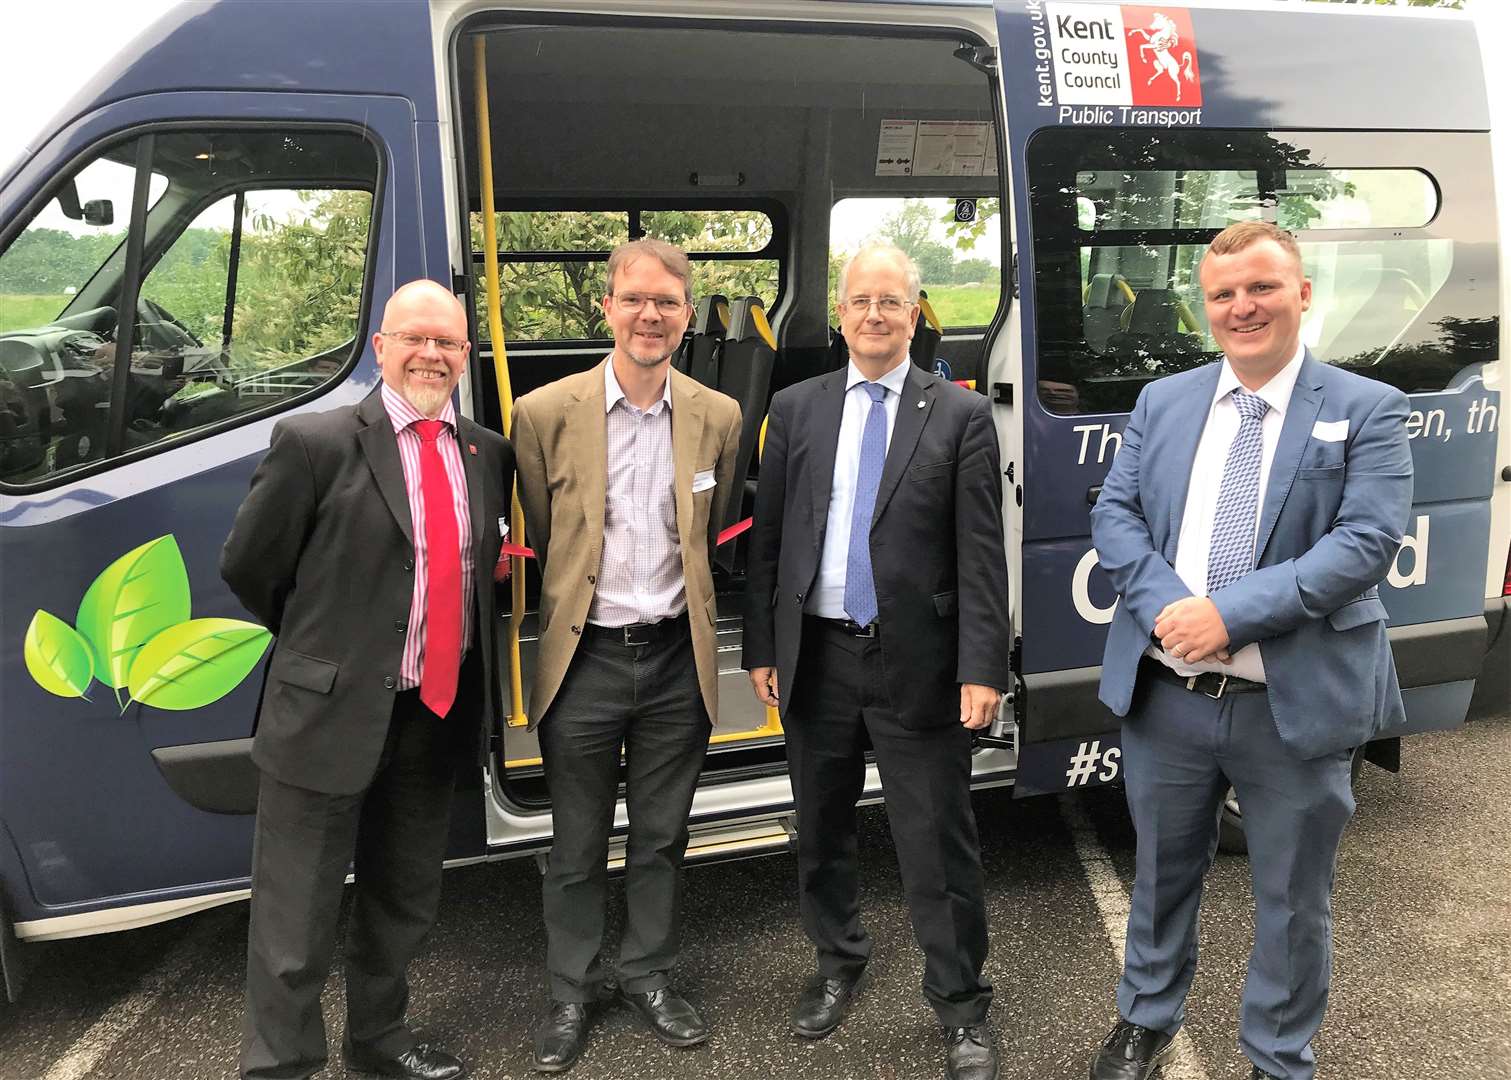 Grahame Neagus, Head of LCV, Renault Trucks; Compaid Chief Executive Stephen Elsden; Deputy cabinet member for highways, transportation and the environment Michael Payne; KCC public transport’s Shane Hymers (12848353)